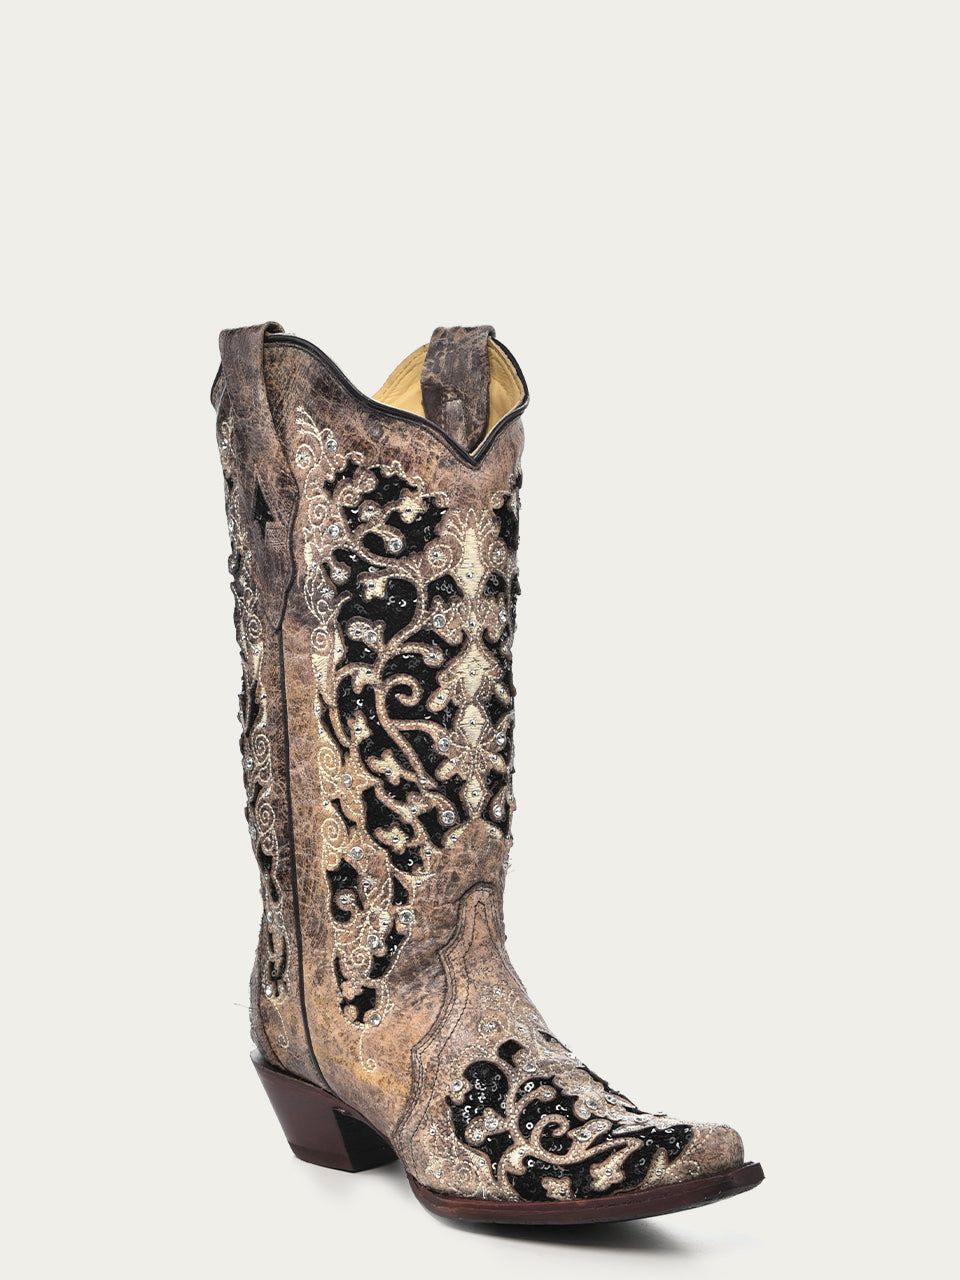 A3569 - WOMEN'S BLACK GLITTER INLAY FLORAL OVERLAY WITH CRYSTALS AND STUDS SNIP TOE BROWN COWBOY BOOT